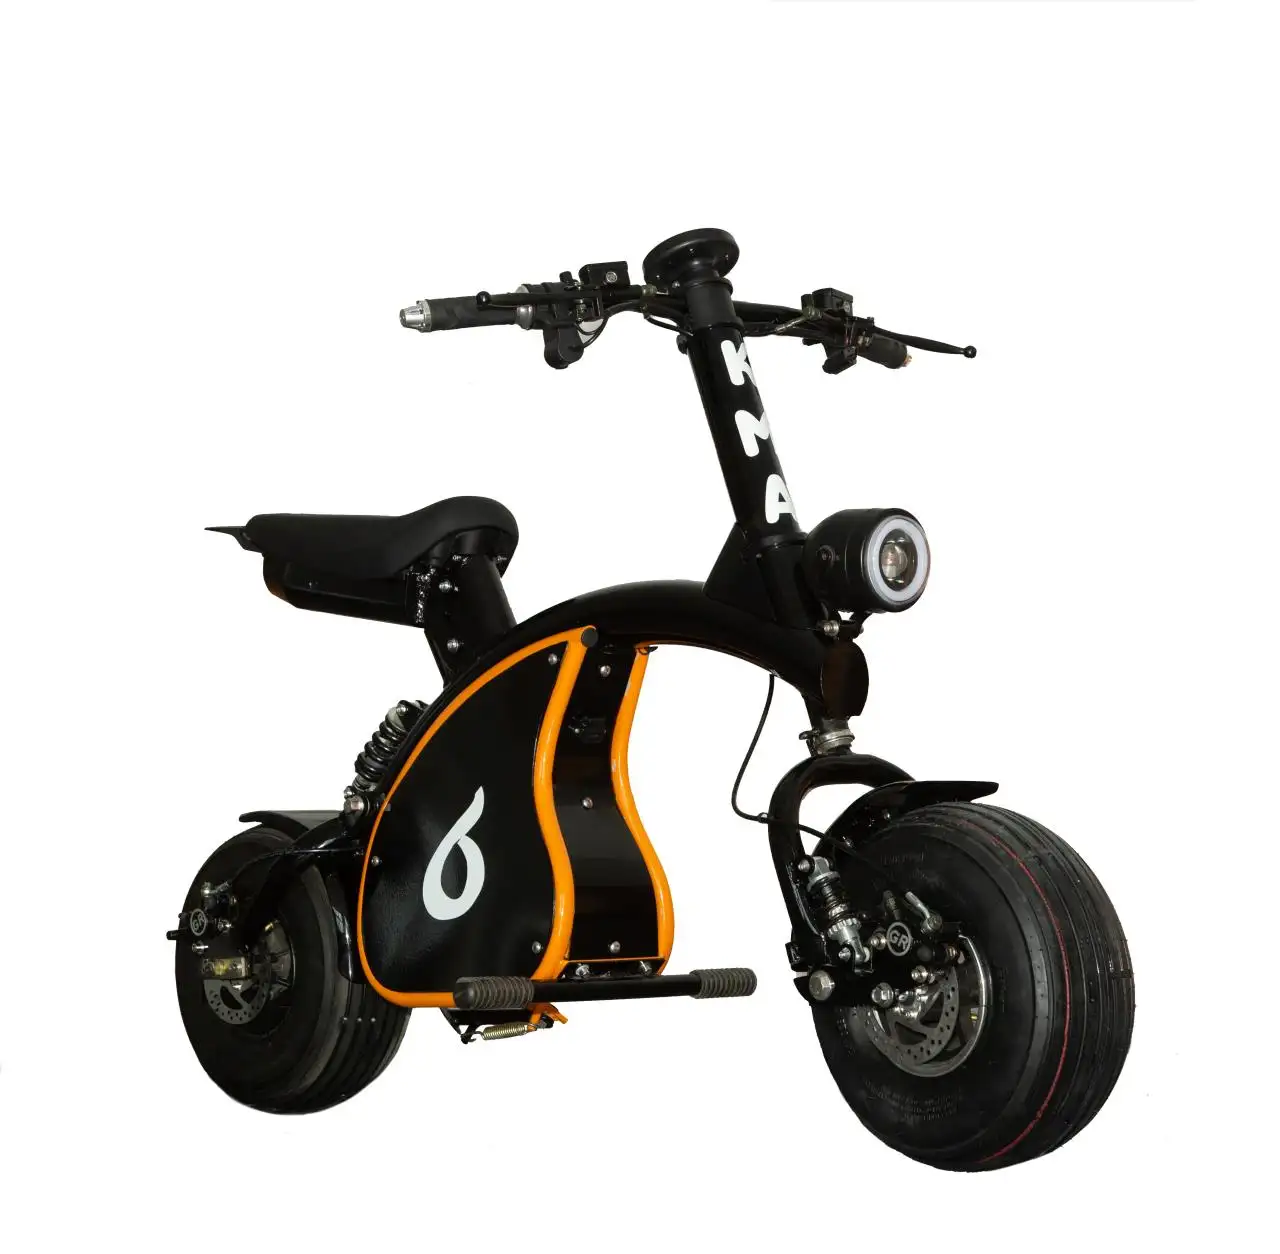 China Hot Selling High Quality 48V 800W Electric Motorcycle Minibike Racing Scooters Cheap Price Electric Motorcycles